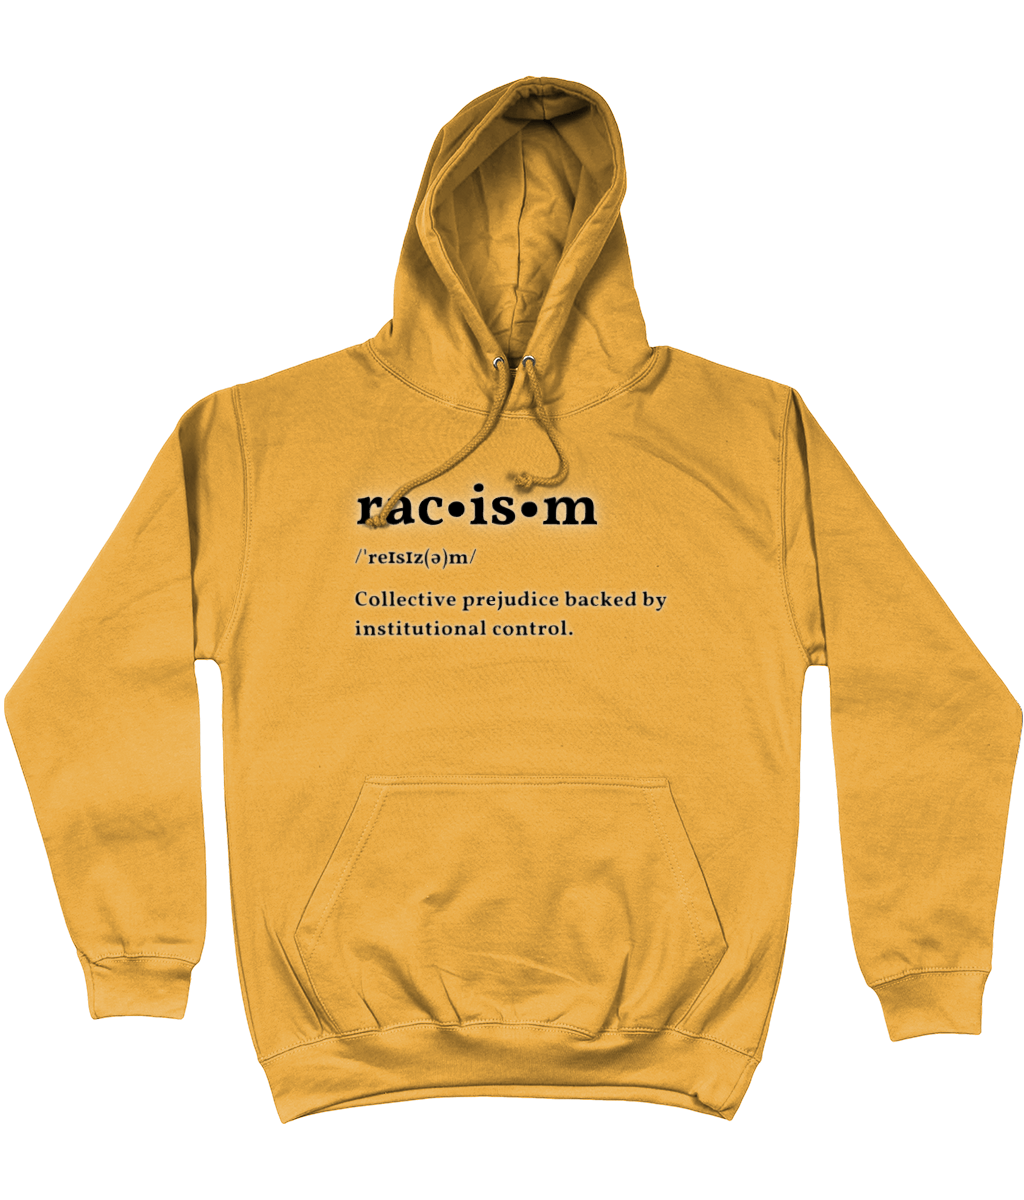 Stand Against Prejudice With 'Racism Is The Pits' Hoodie